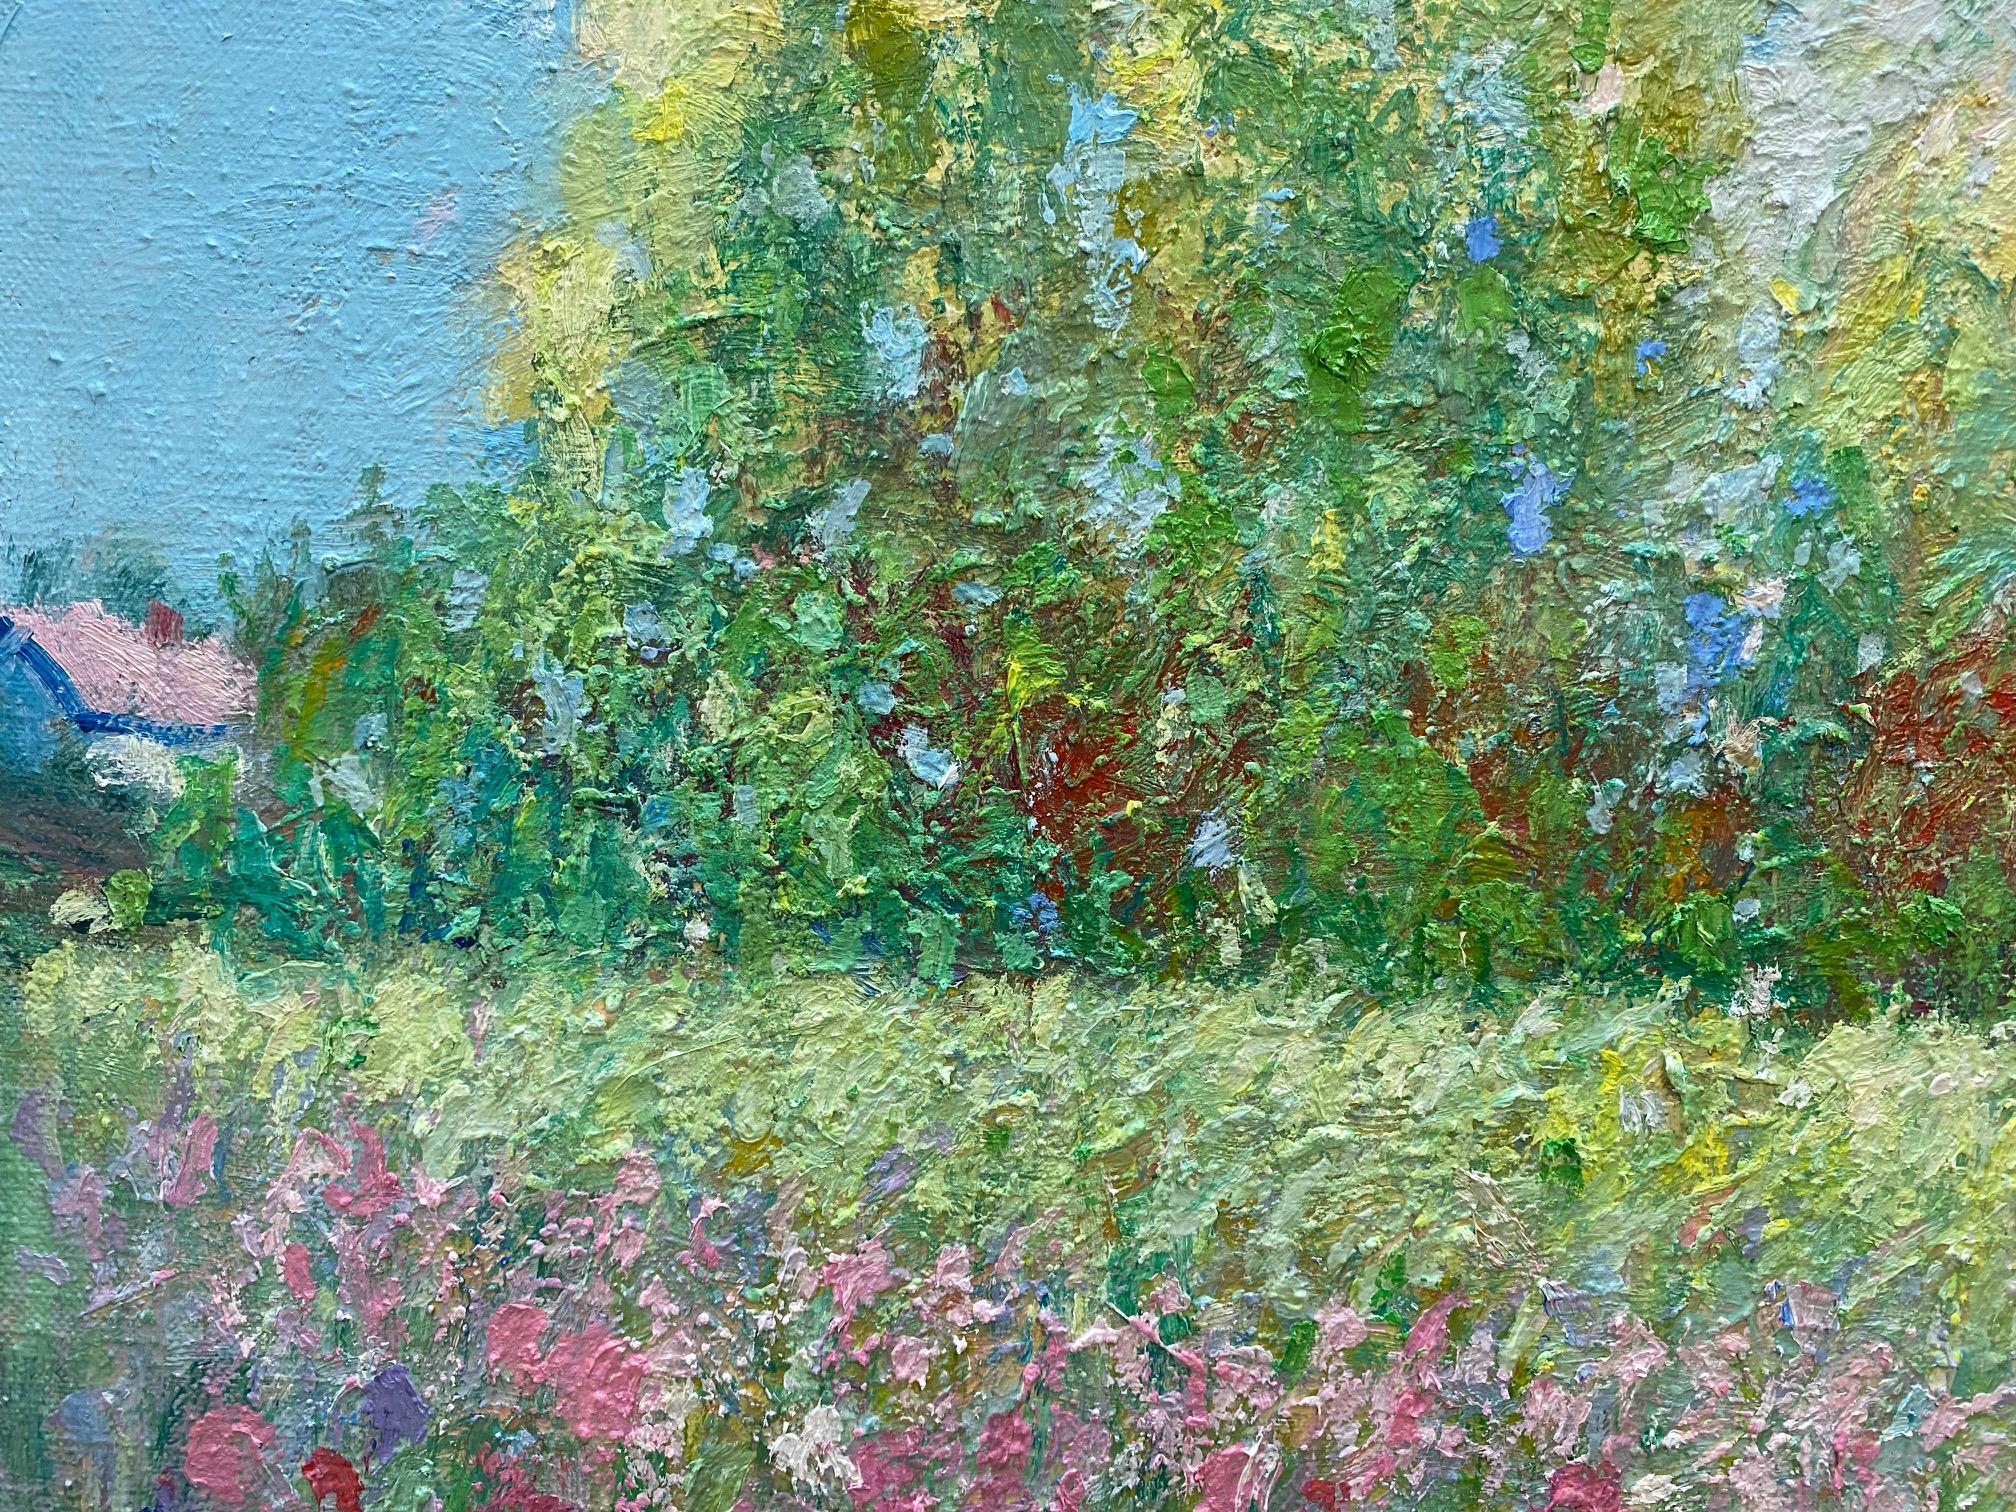 An eternal spring has been the fantasy of not only the French Impressionists but of humanity.  This original floral landscape comes alive as the  sun washed flowers with their alluring combinations of yellows, pinks, soft greens, aquas and other